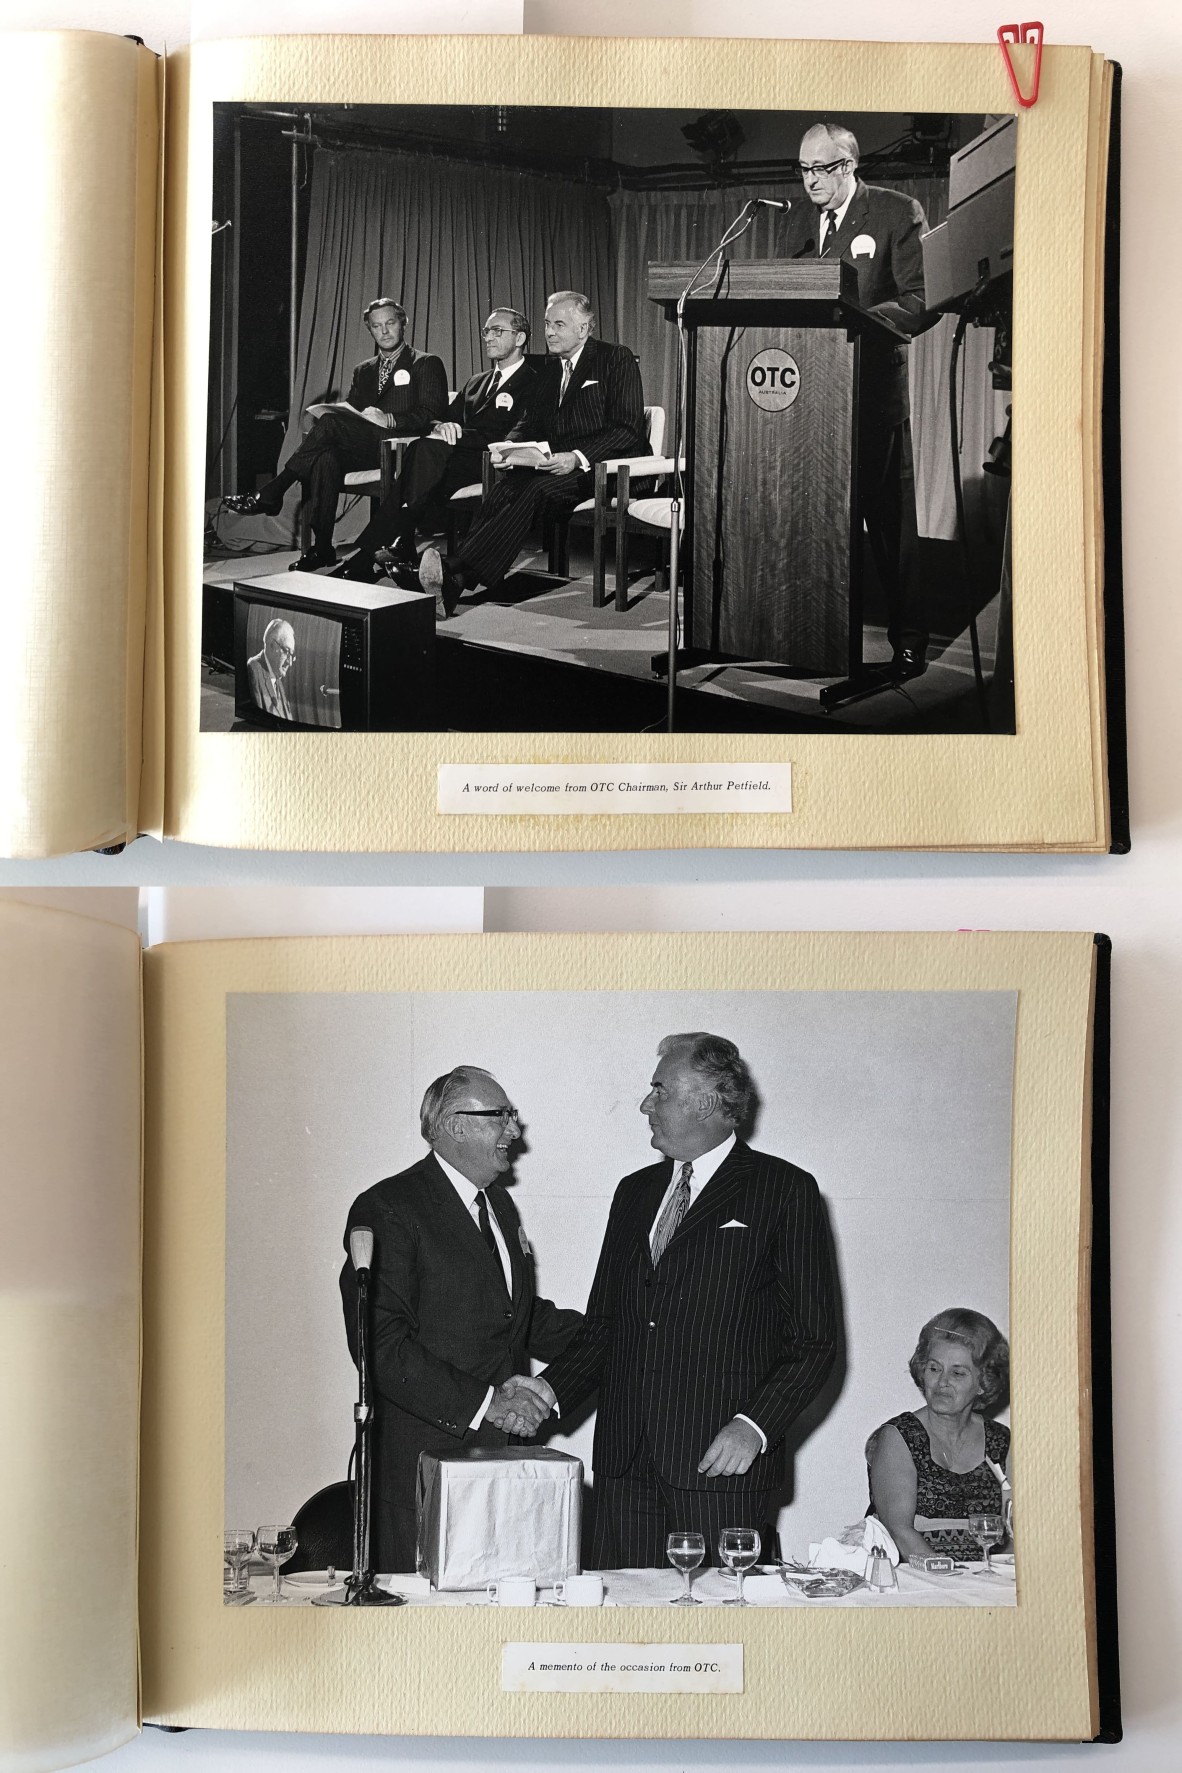 Album - Opening of the Broadway International Telecommunications Terminal 21 February 1974 Sir Arthur Petfield and the then Prime Minister the Hon EG Whitlam QC MP